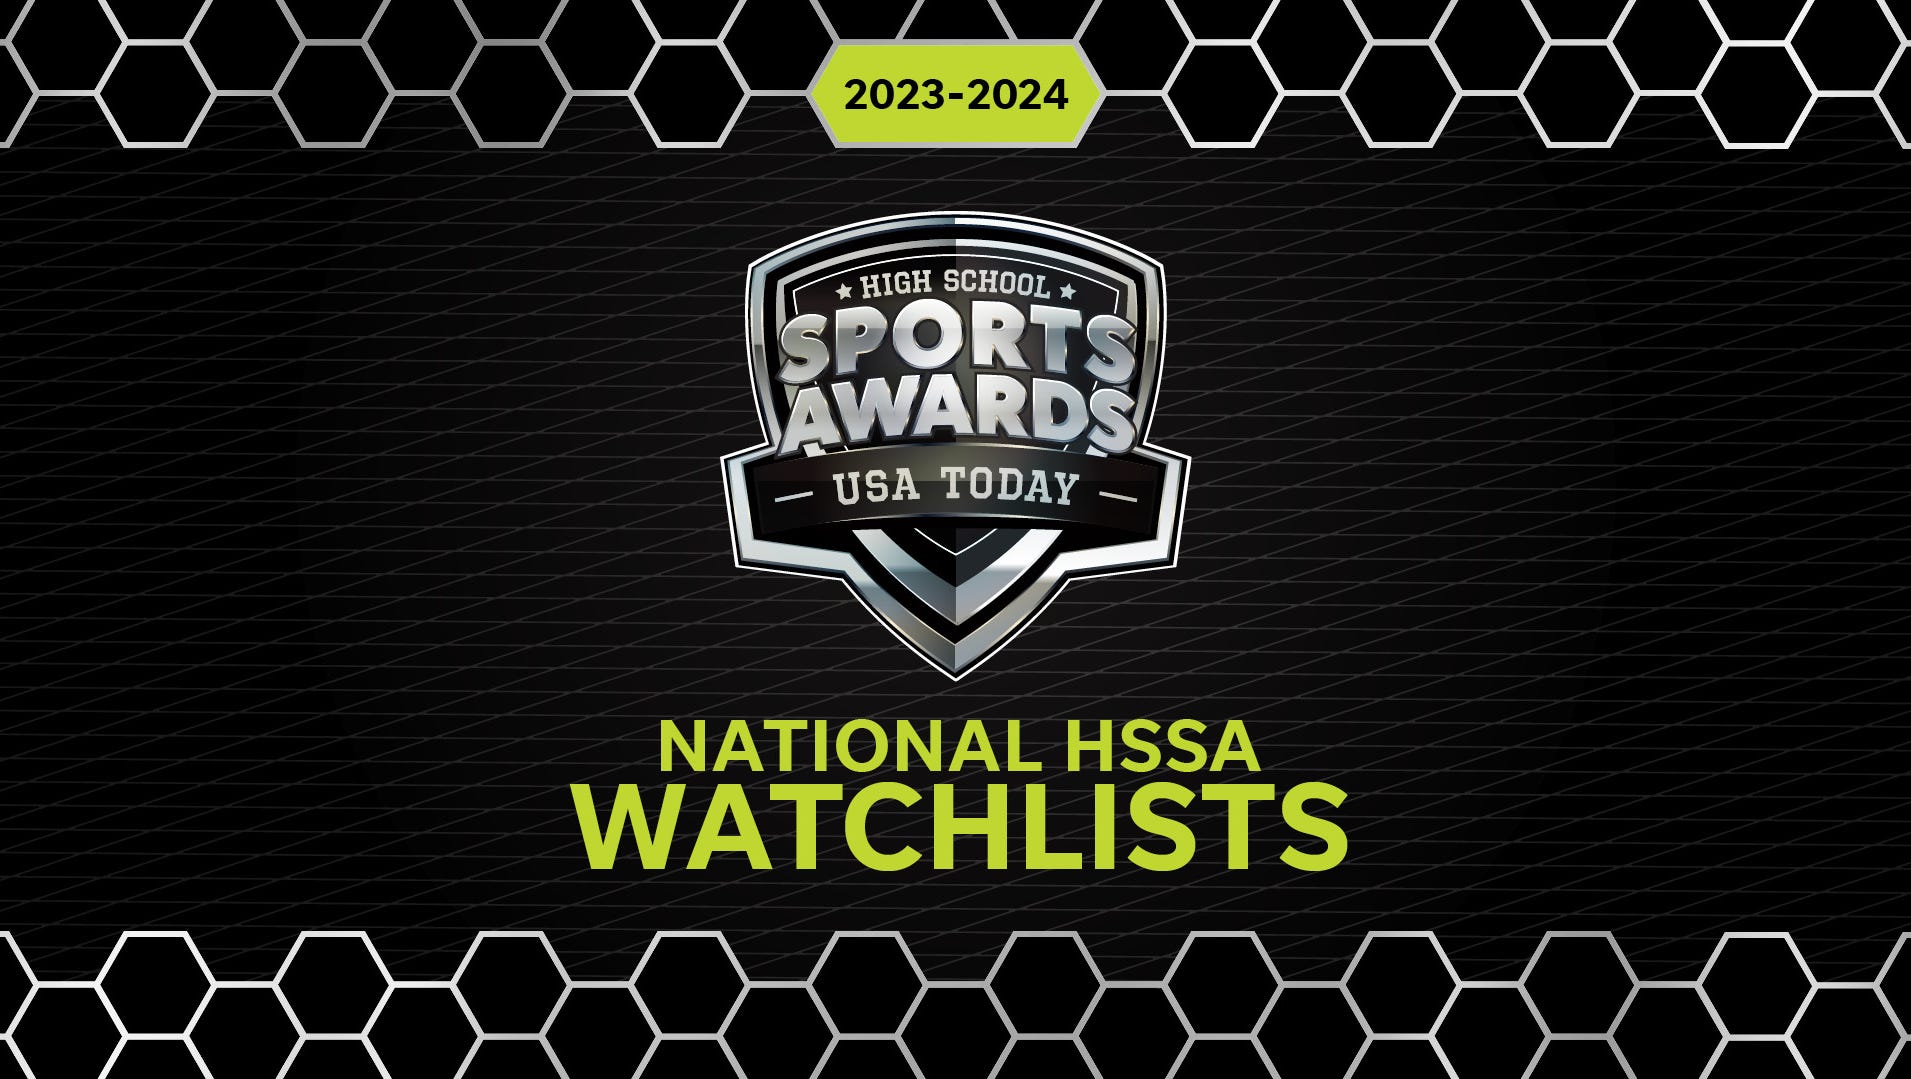   
																Check out our watch list for 2024 USA TODAY HSSA Boys Volleyball Player of the Year 
															 